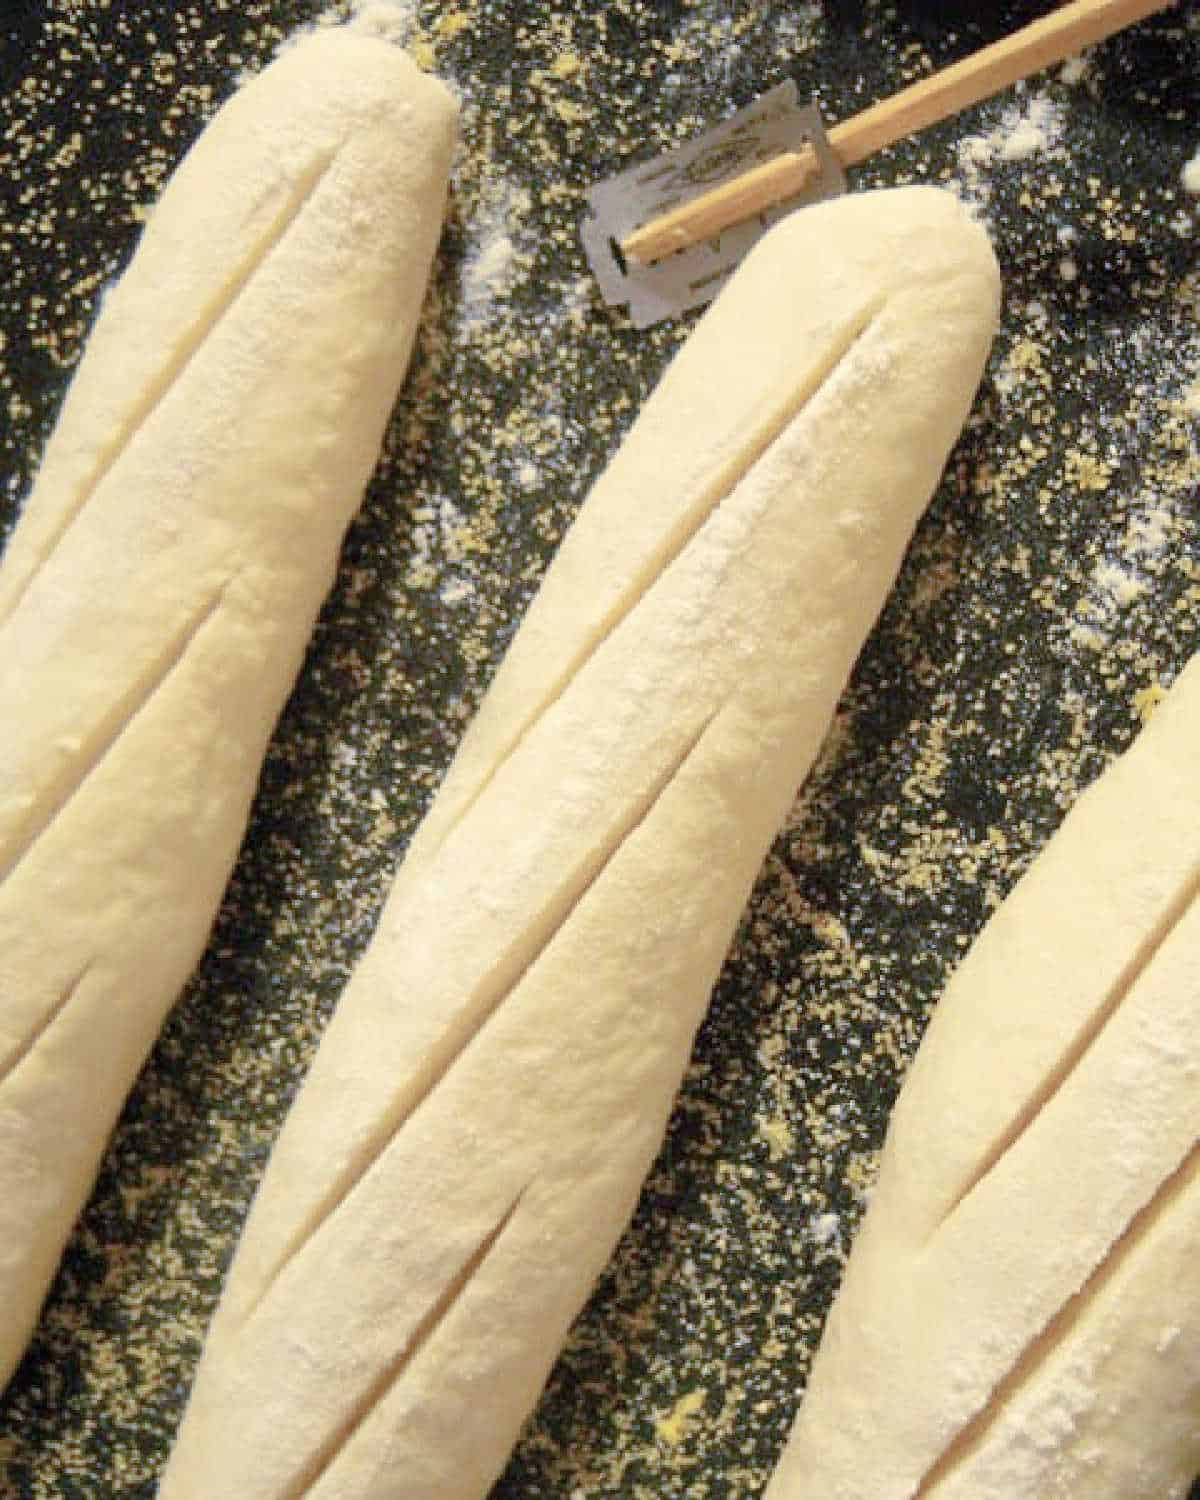 Scored baguettes on a dark baking pan with a lame (razor) beside them.